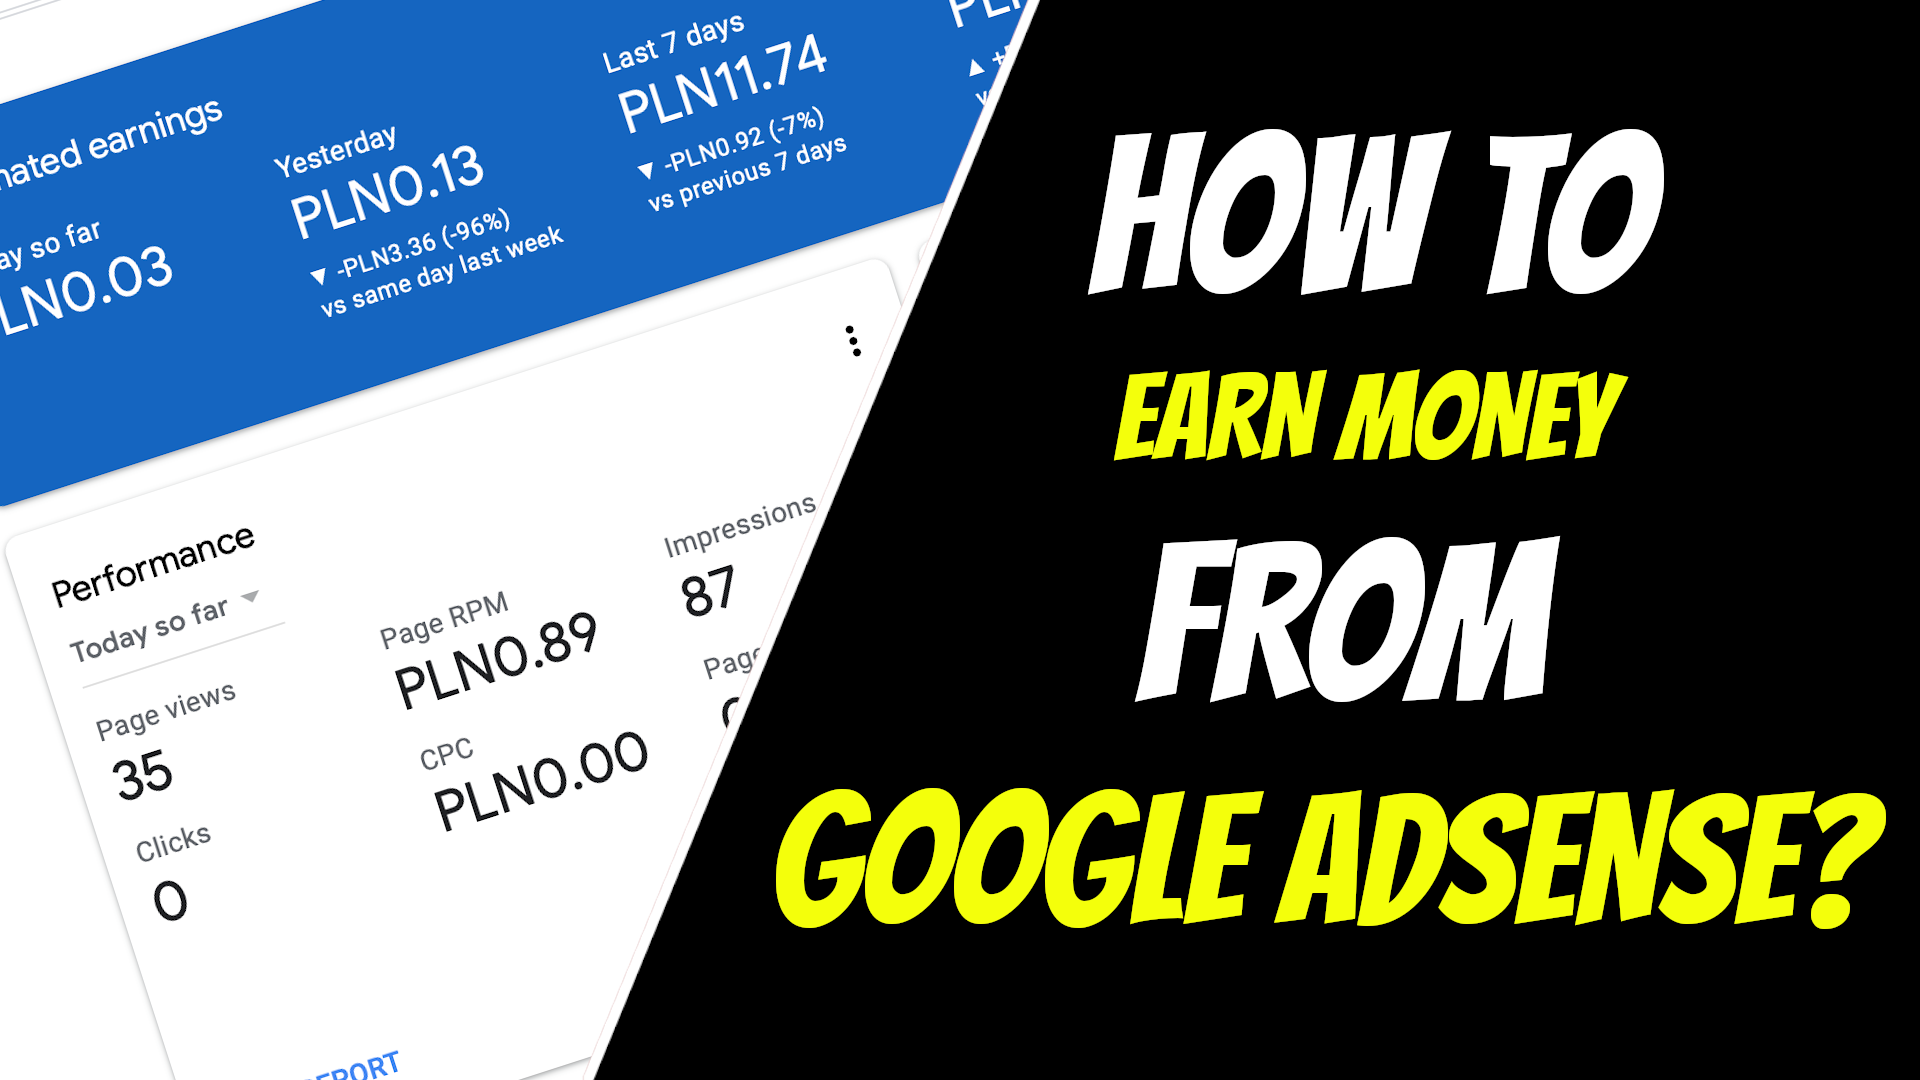 How to earn money from Google AdSense?